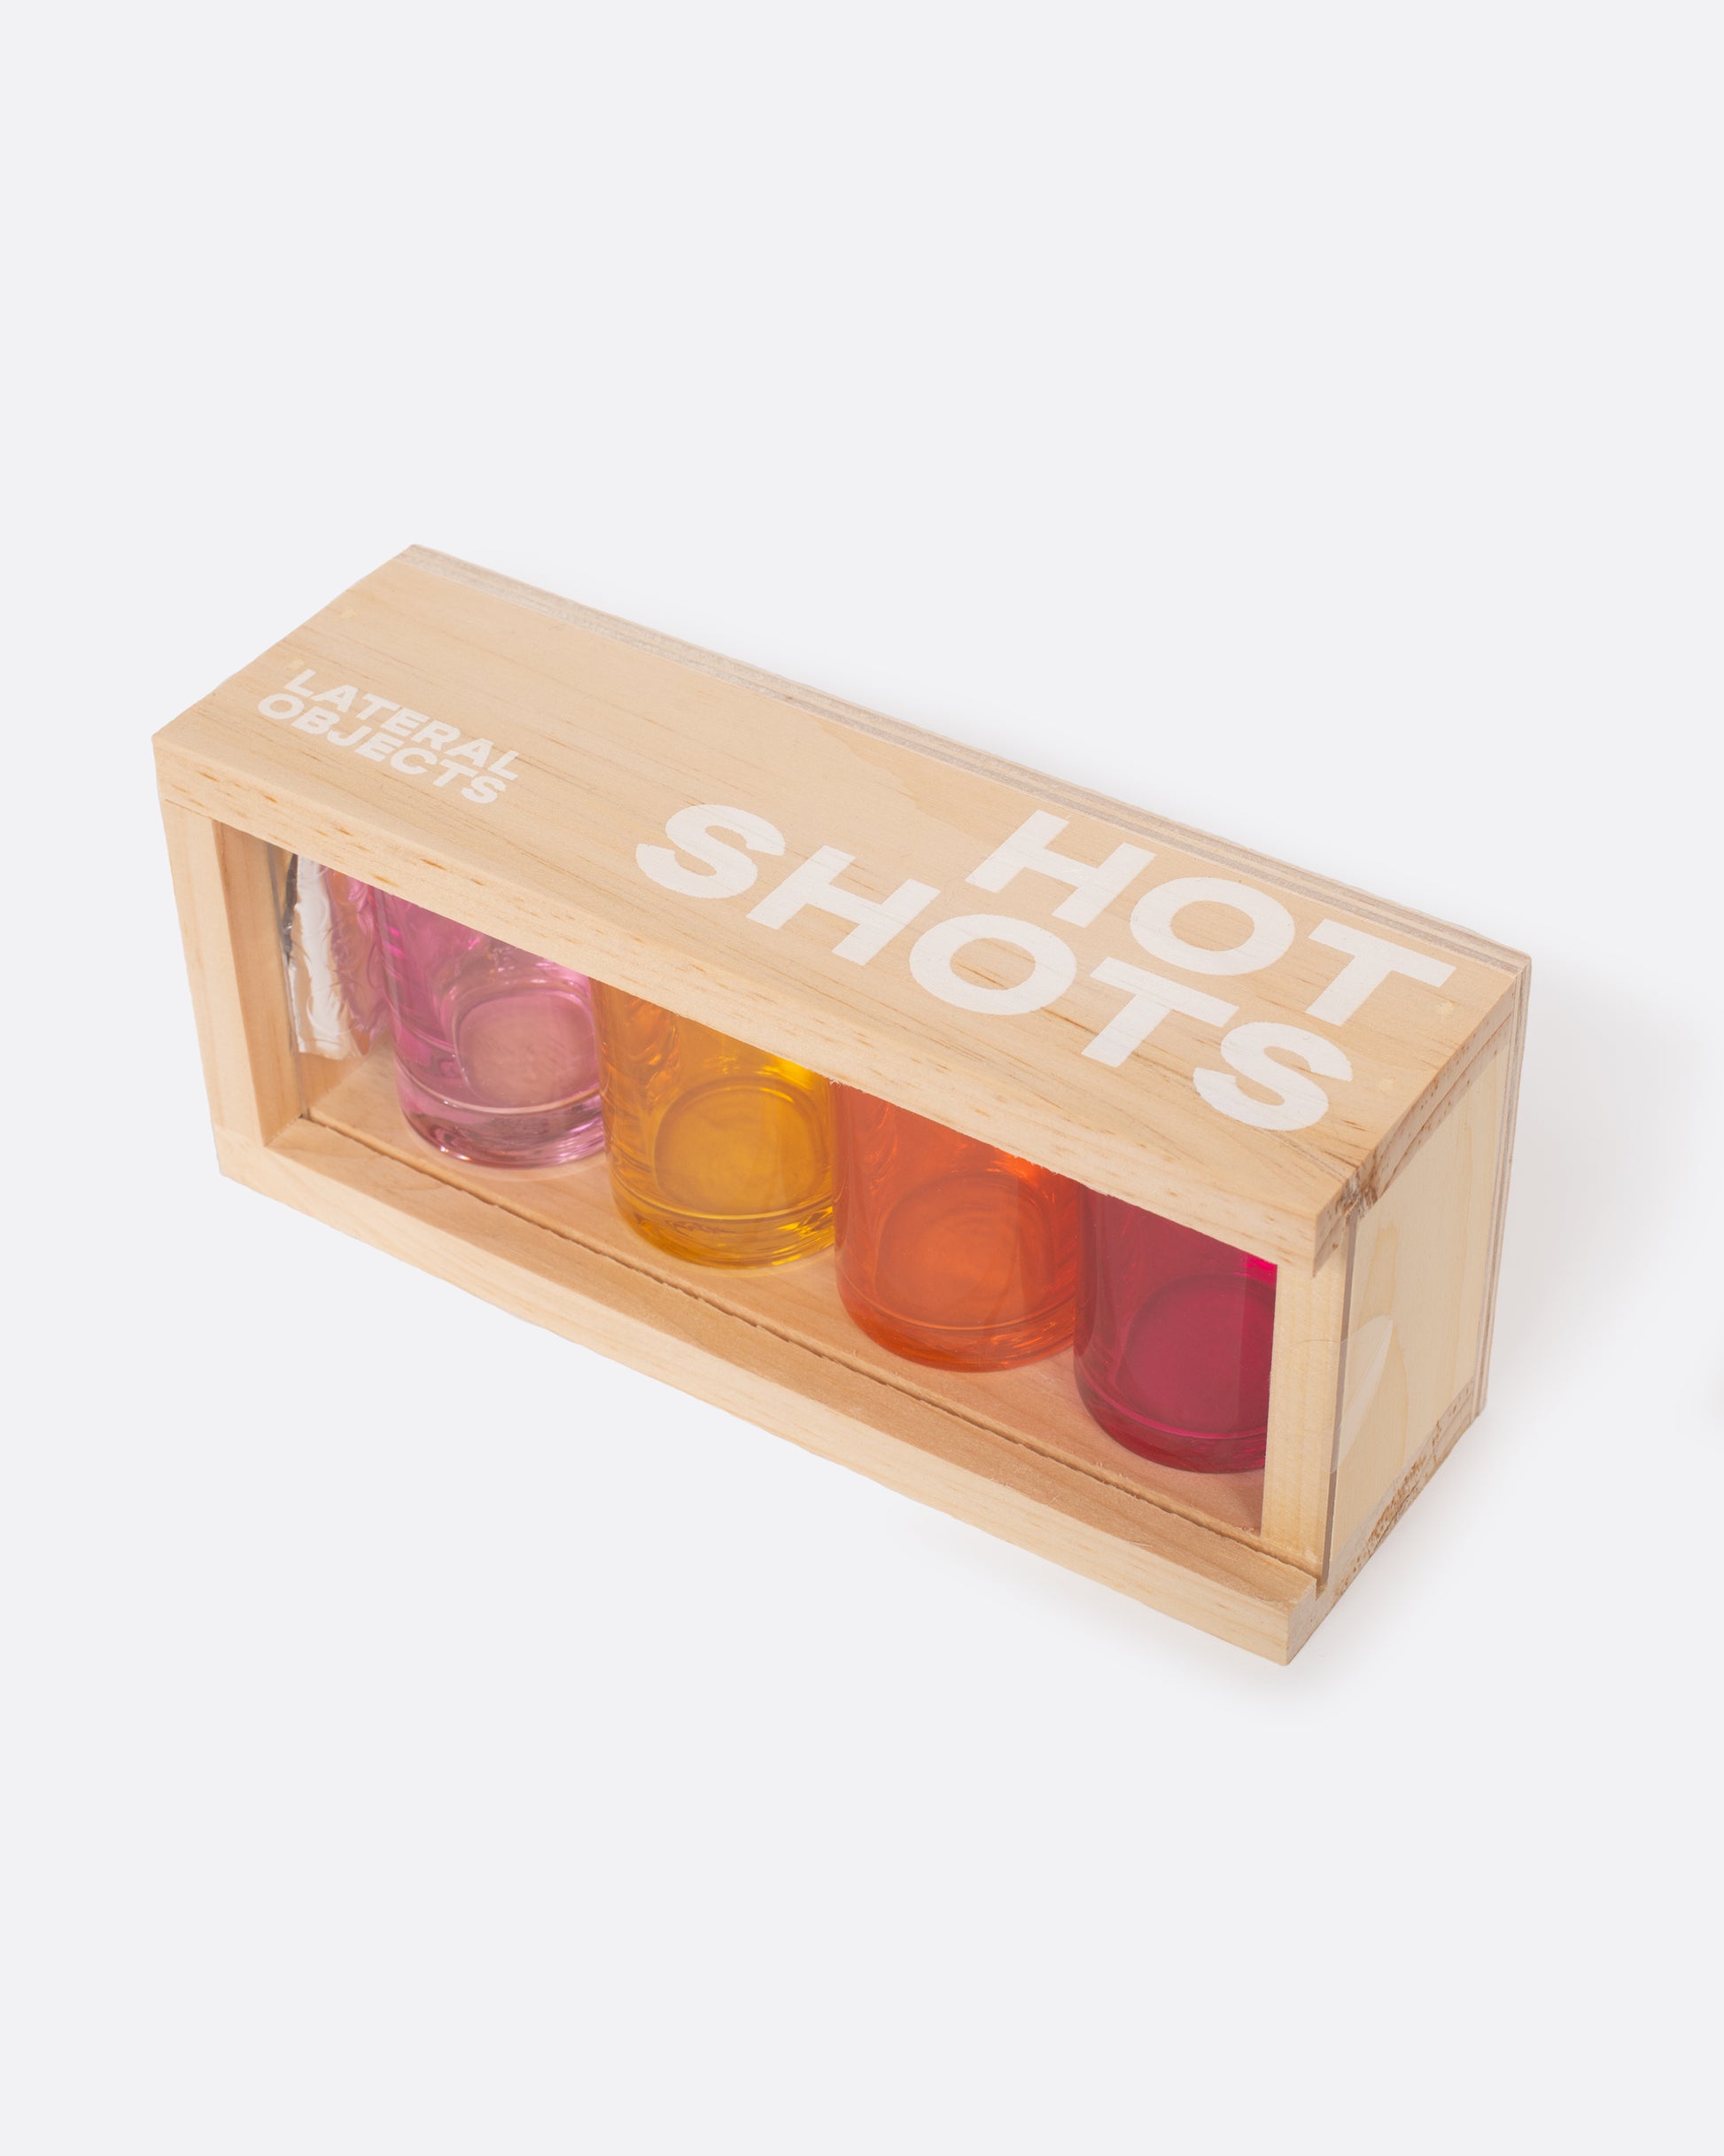 Four glass shot glasses in shades of pink, orange, and yellow, shown in their wood carrying case.